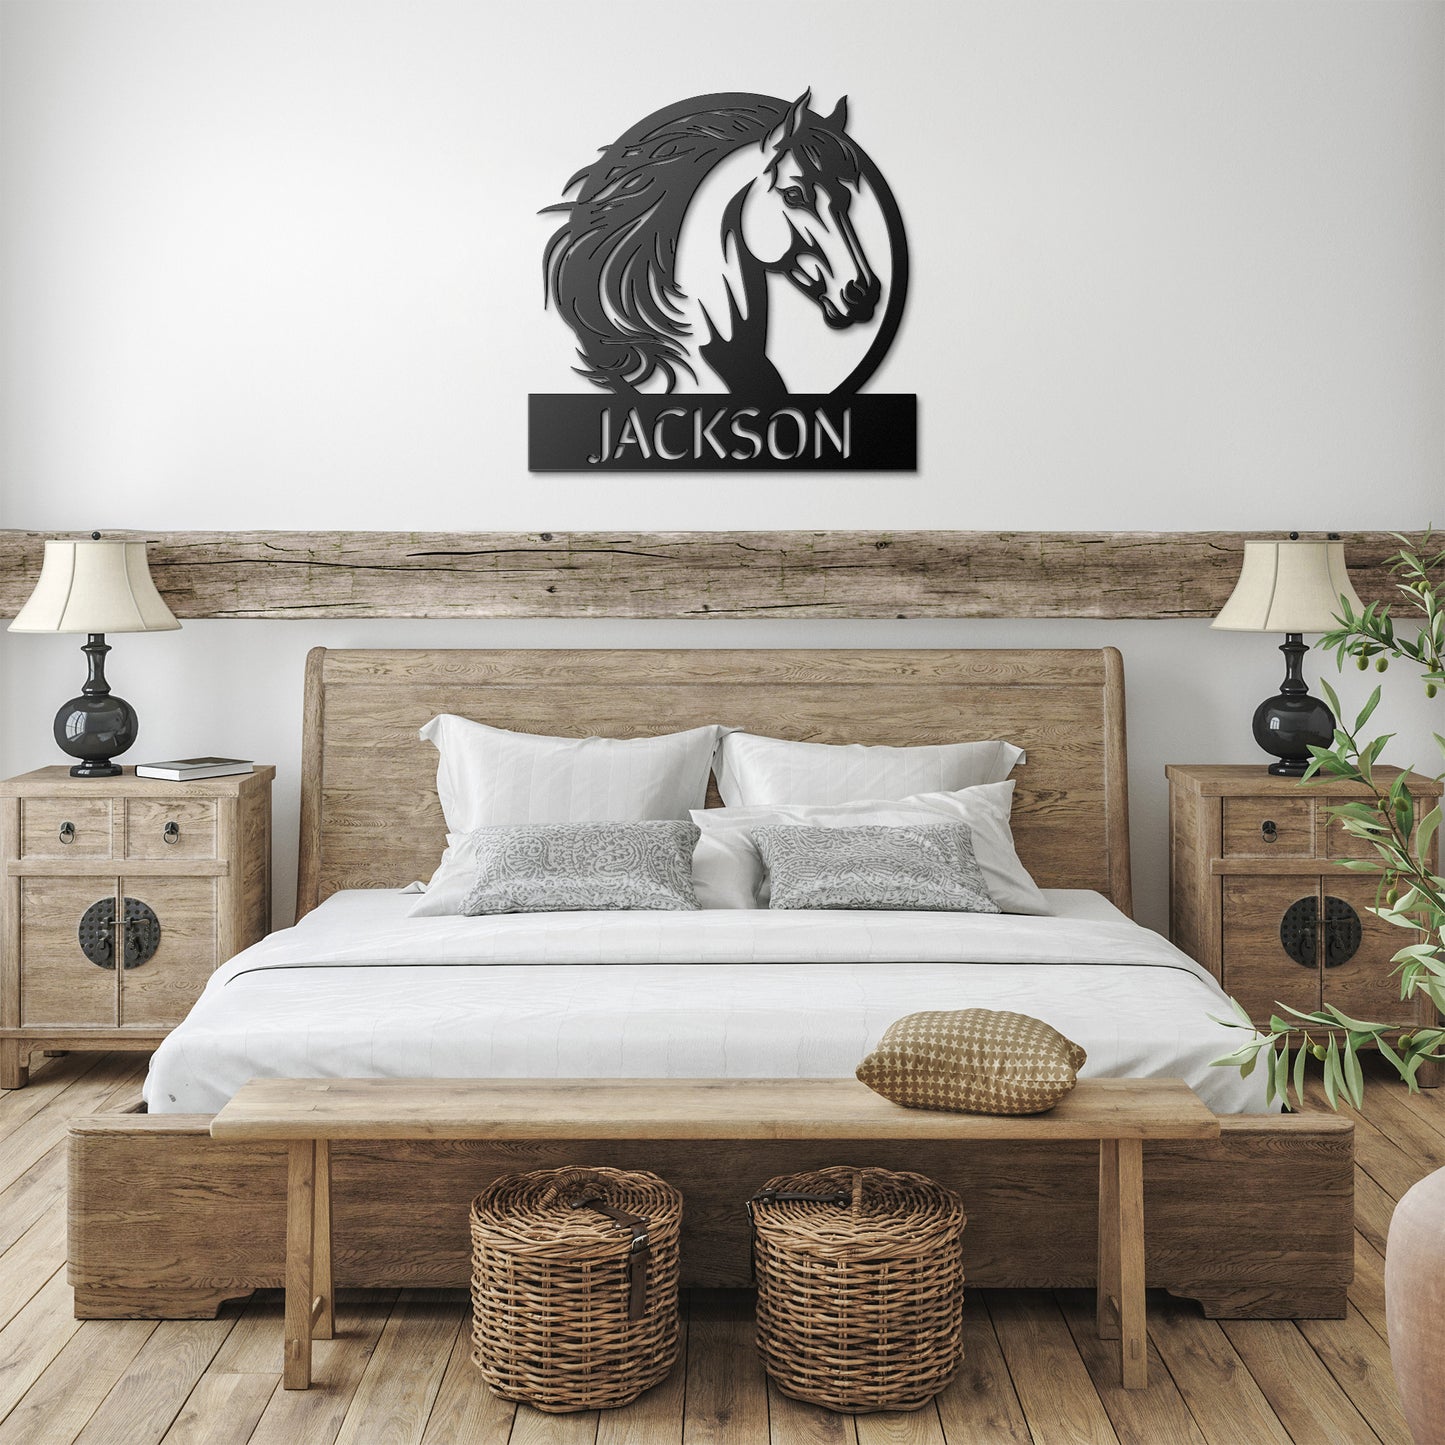 Noble Horse Stall Sign in Circle